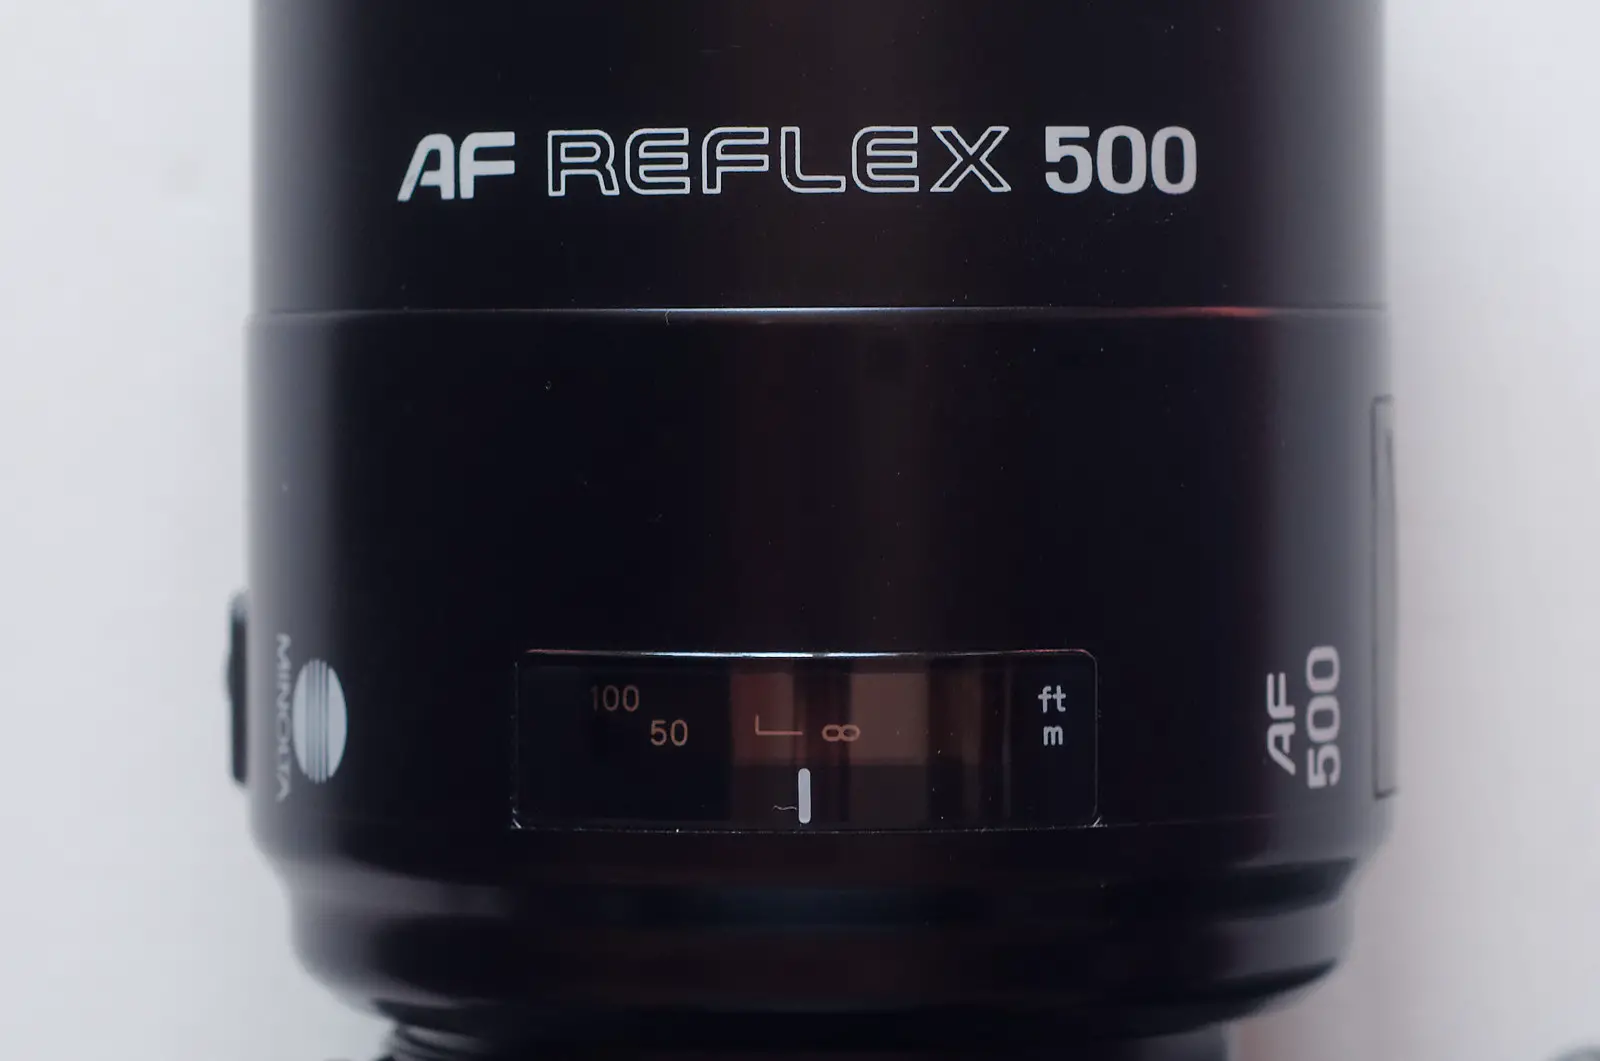 Minolta AF Reflex 500 Review - Letting the CAT Out of the Bag